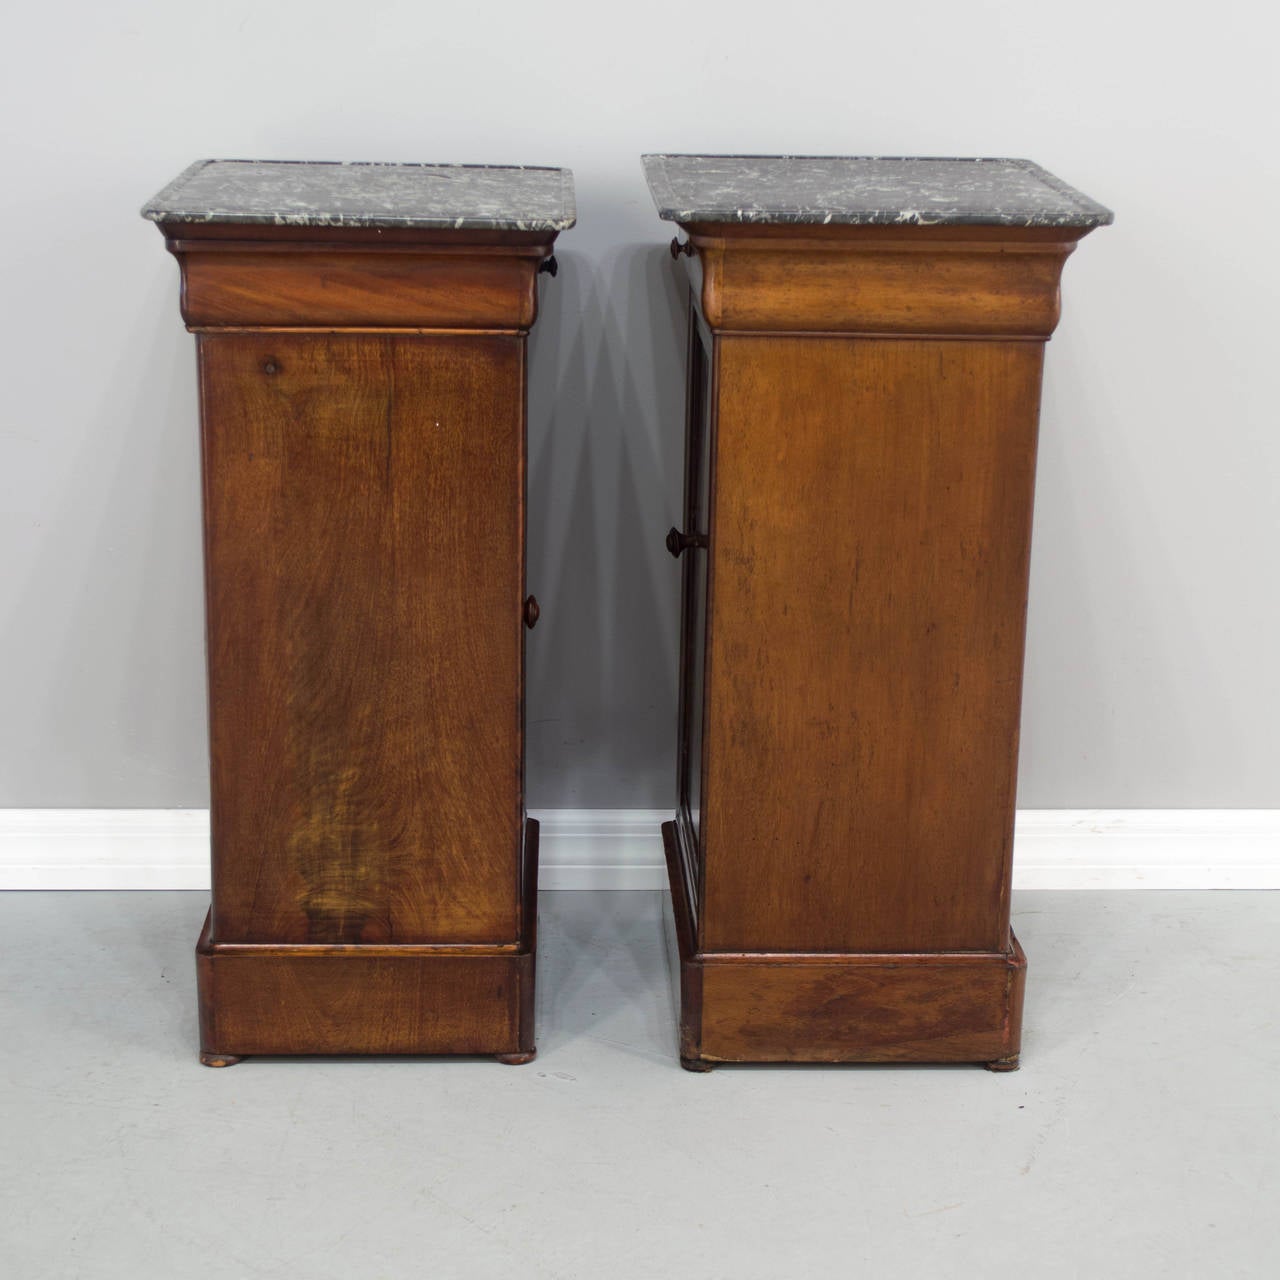 A 19th c. Similar Pair of Louis Philippe Night Tables made of veneer and solid Mahogany, each having a door below a drawer, topped with a grooves St Anne Marble top. The Left one is 29.5